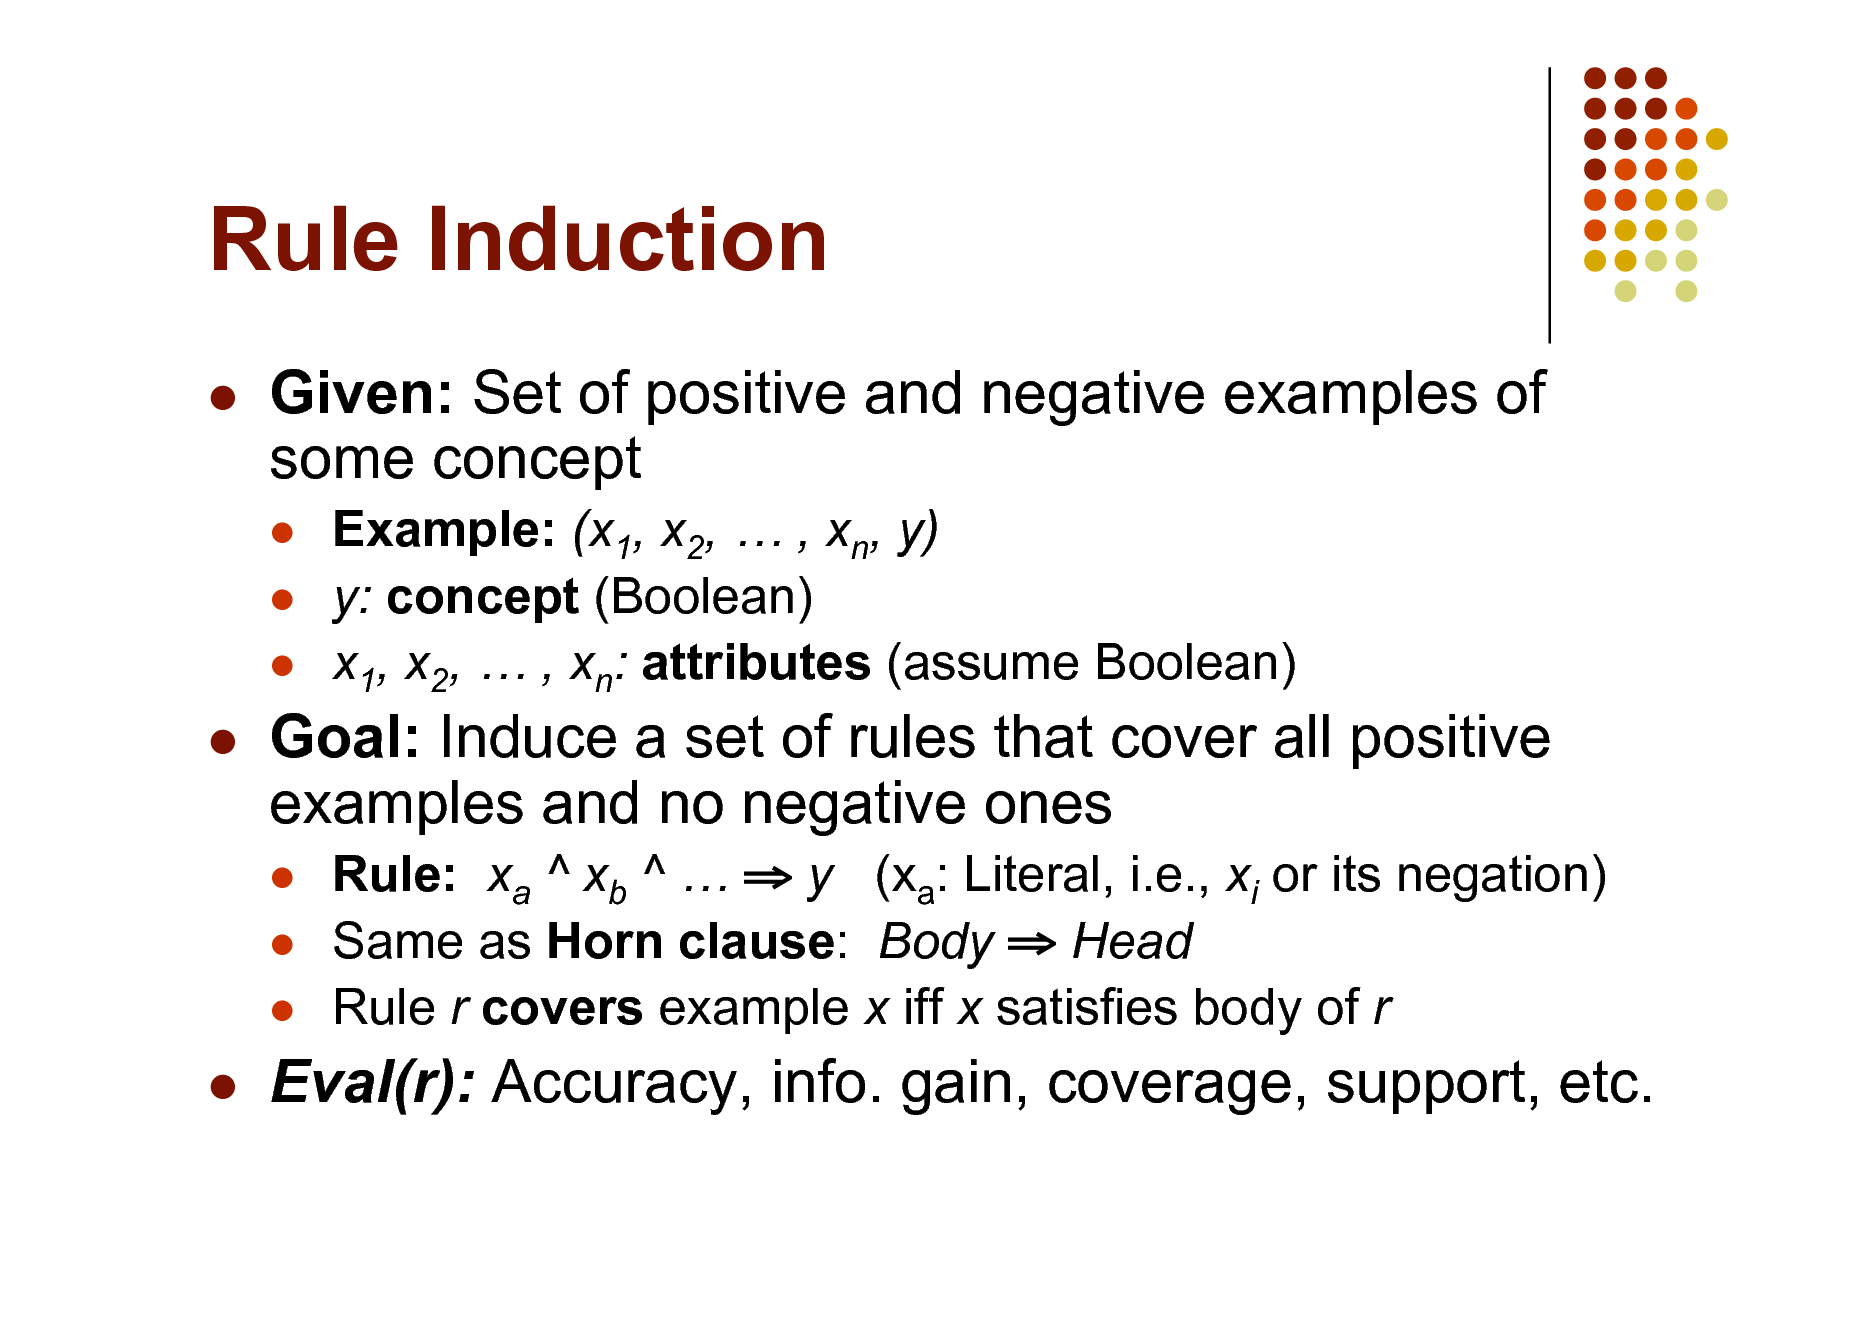 Slide: Rule Induction


Given: Set of positive and negative examples of some concept
  

Example: (x1, x2,  , xn, y) y: concept (Boolean) x1, x2,  , xn: attributes (assume Boolean)



Goal: Induce a set of rules that cover all positive examples and no negative ones
  

Rule: xa ^ xb ^   y (xa: Literal, i.e., xi or its negation) Same as Horn clause: Body  Head Rule r covers example x iff x satisfies body of r



Eval(r): Accuracy, info. gain, coverage, support, etc.

